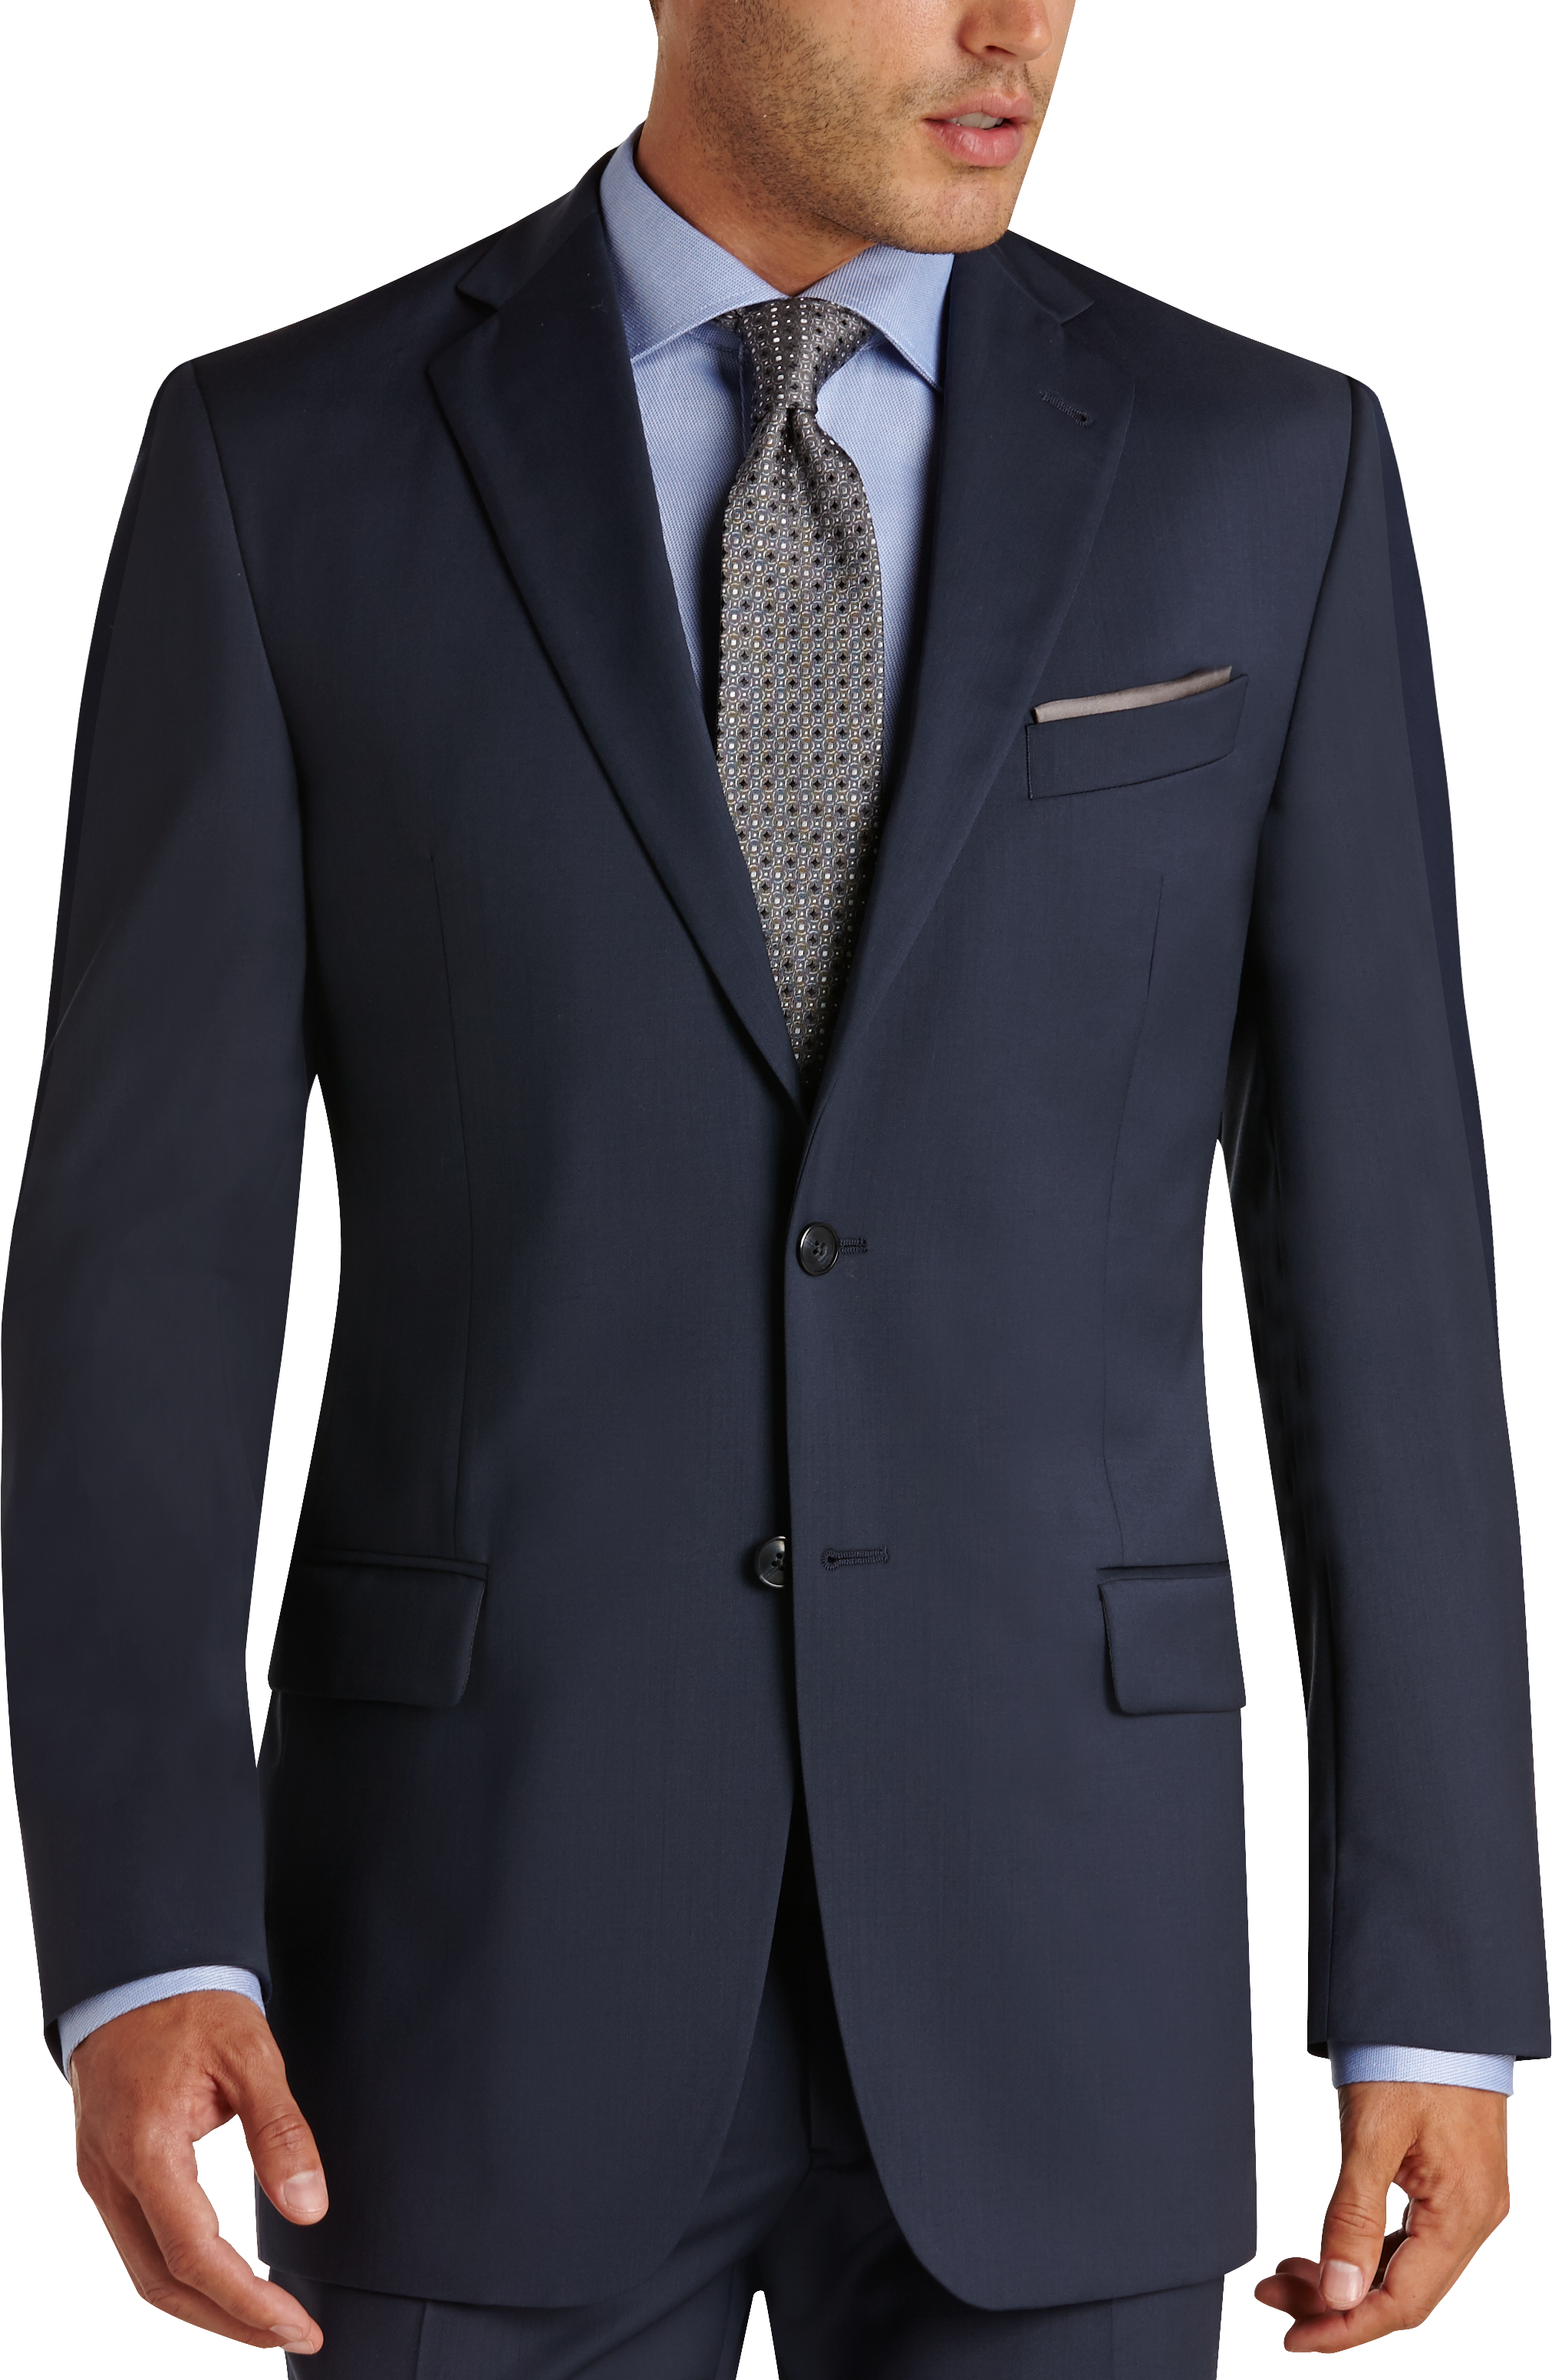 men's wearhouse custom suit alterations - Great Job Chatroom Picture ...